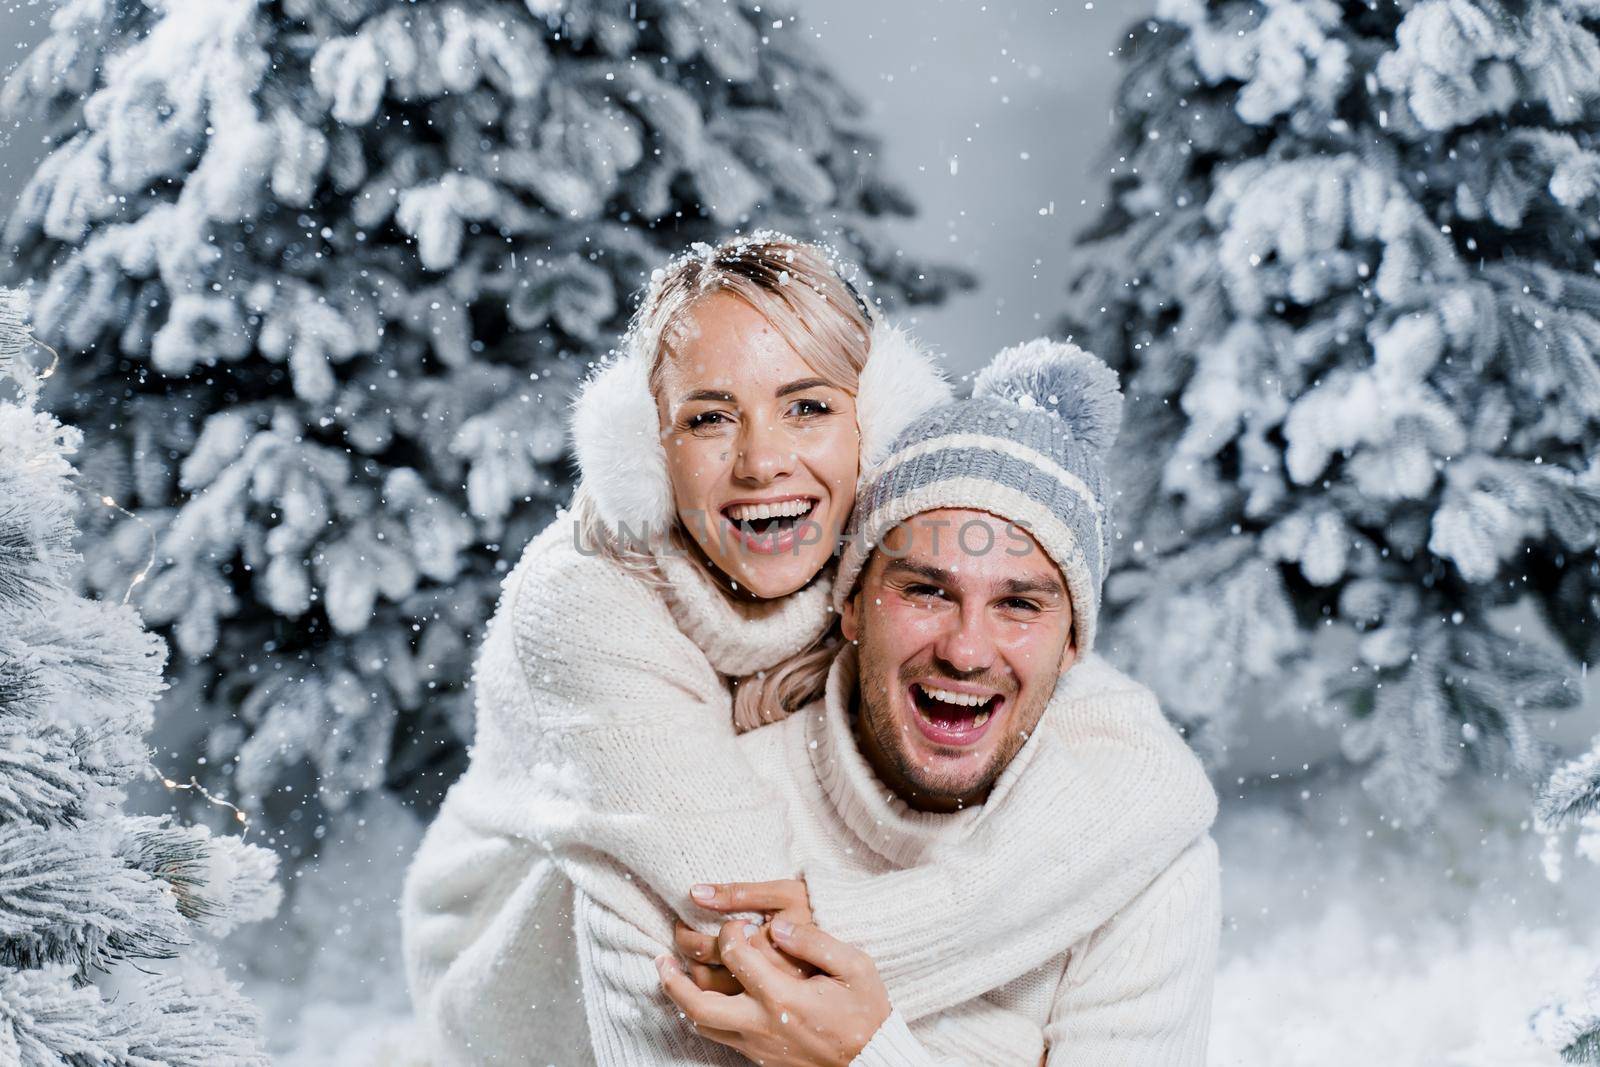 Couple couple laughing and having fun while snow falls near christmass trees. Winter holidays. Love story of young couple weared white pullovers. Happy man and young woman hug each other.